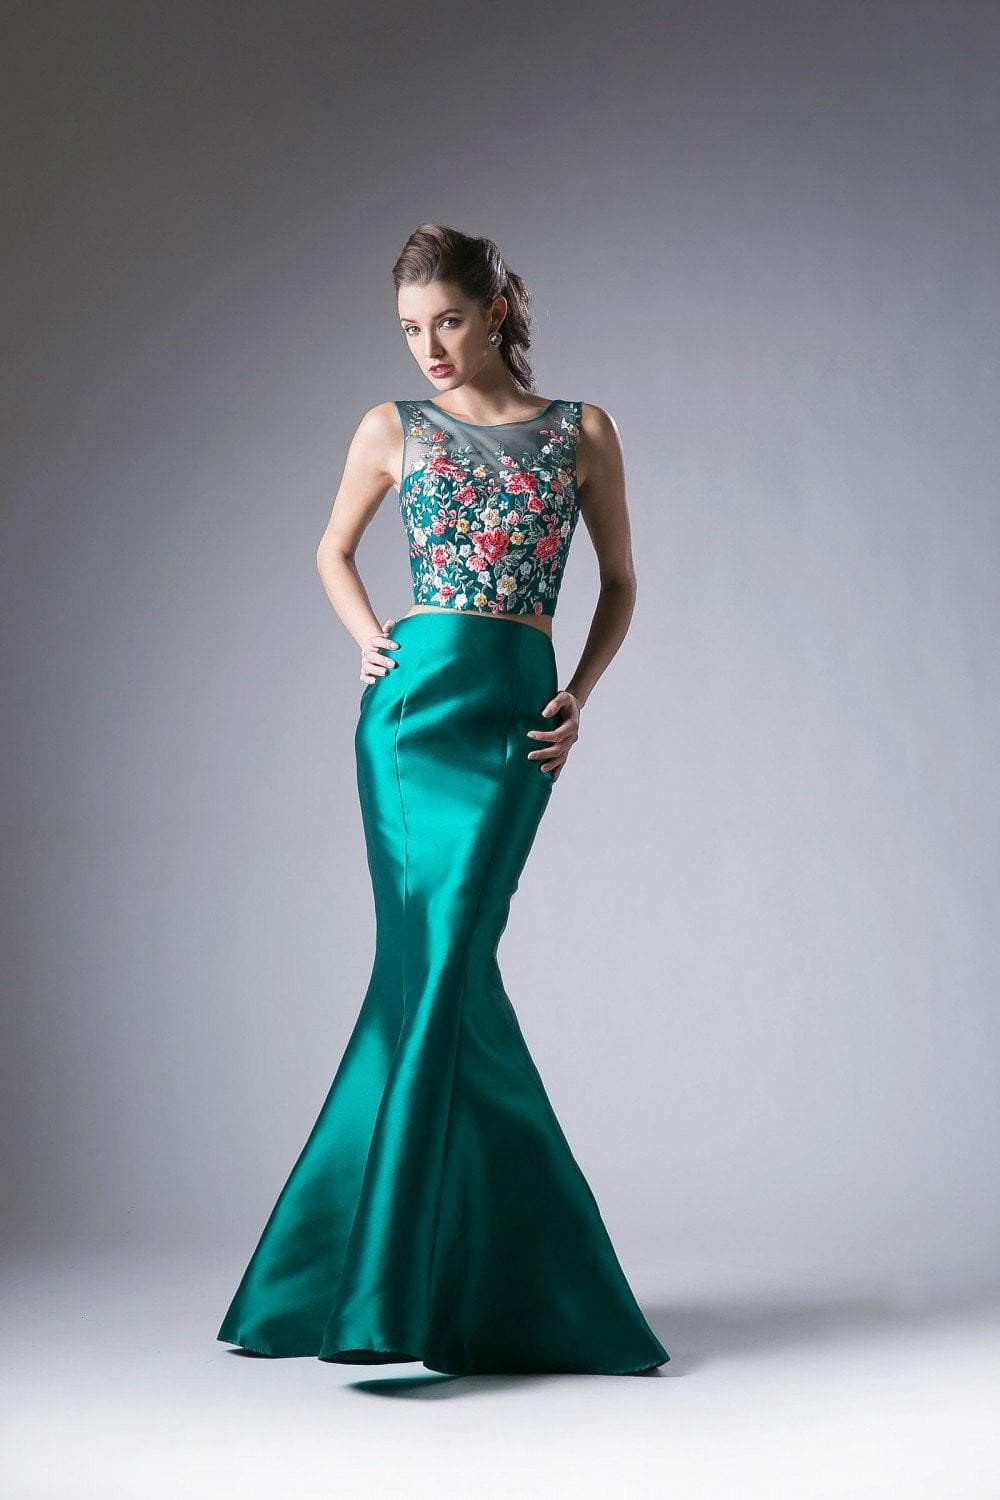 Cinderella Divine - HW03 Two Piece Floral Appliqued Mermaid Gown Special Occasion Dress